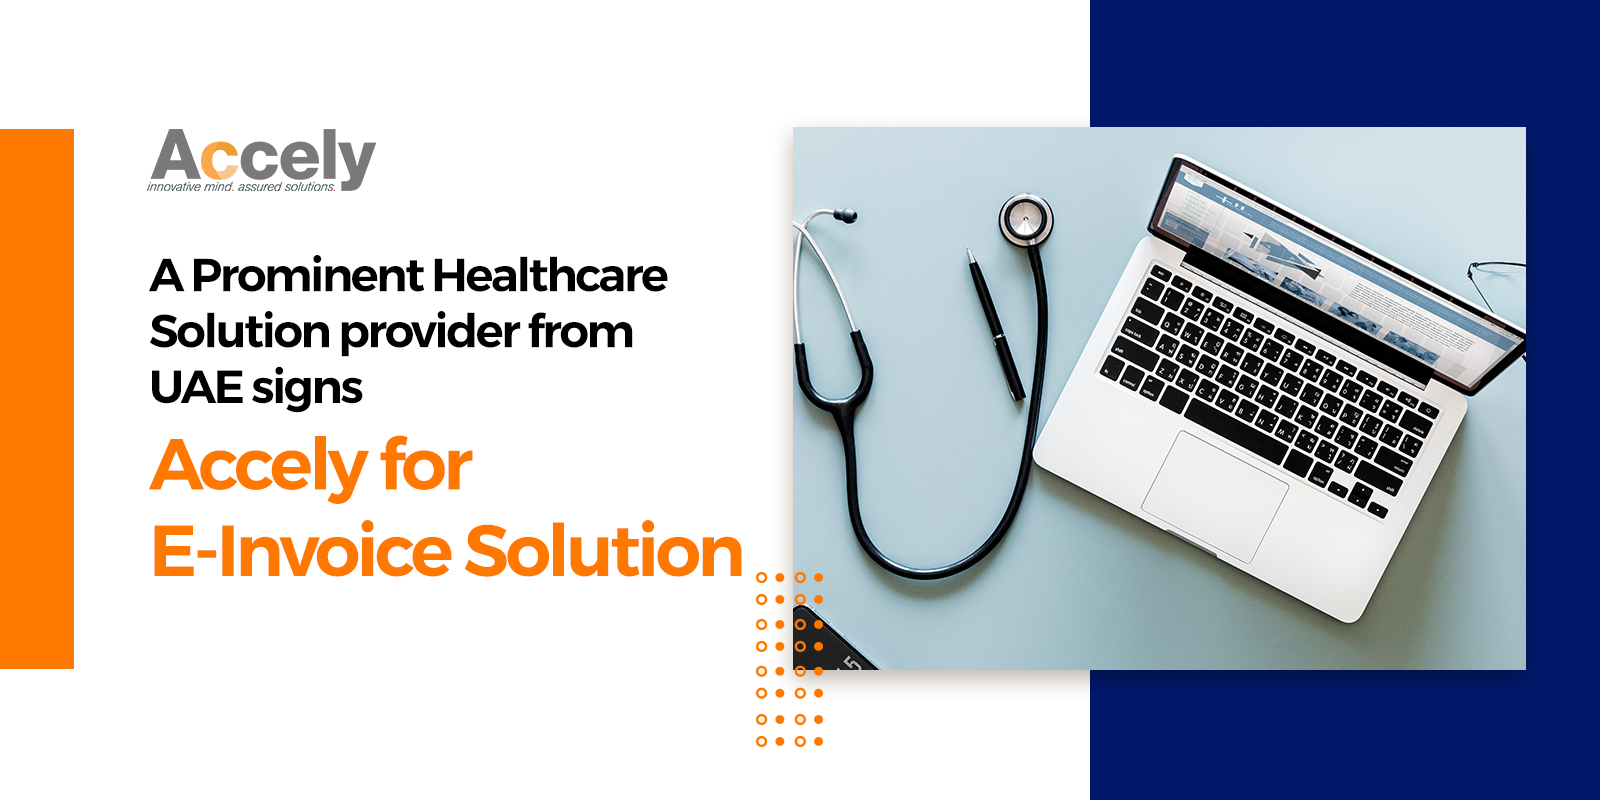 A Prominent Healthcare Solution provider from UAE signs Accely for E-Invoice Solution